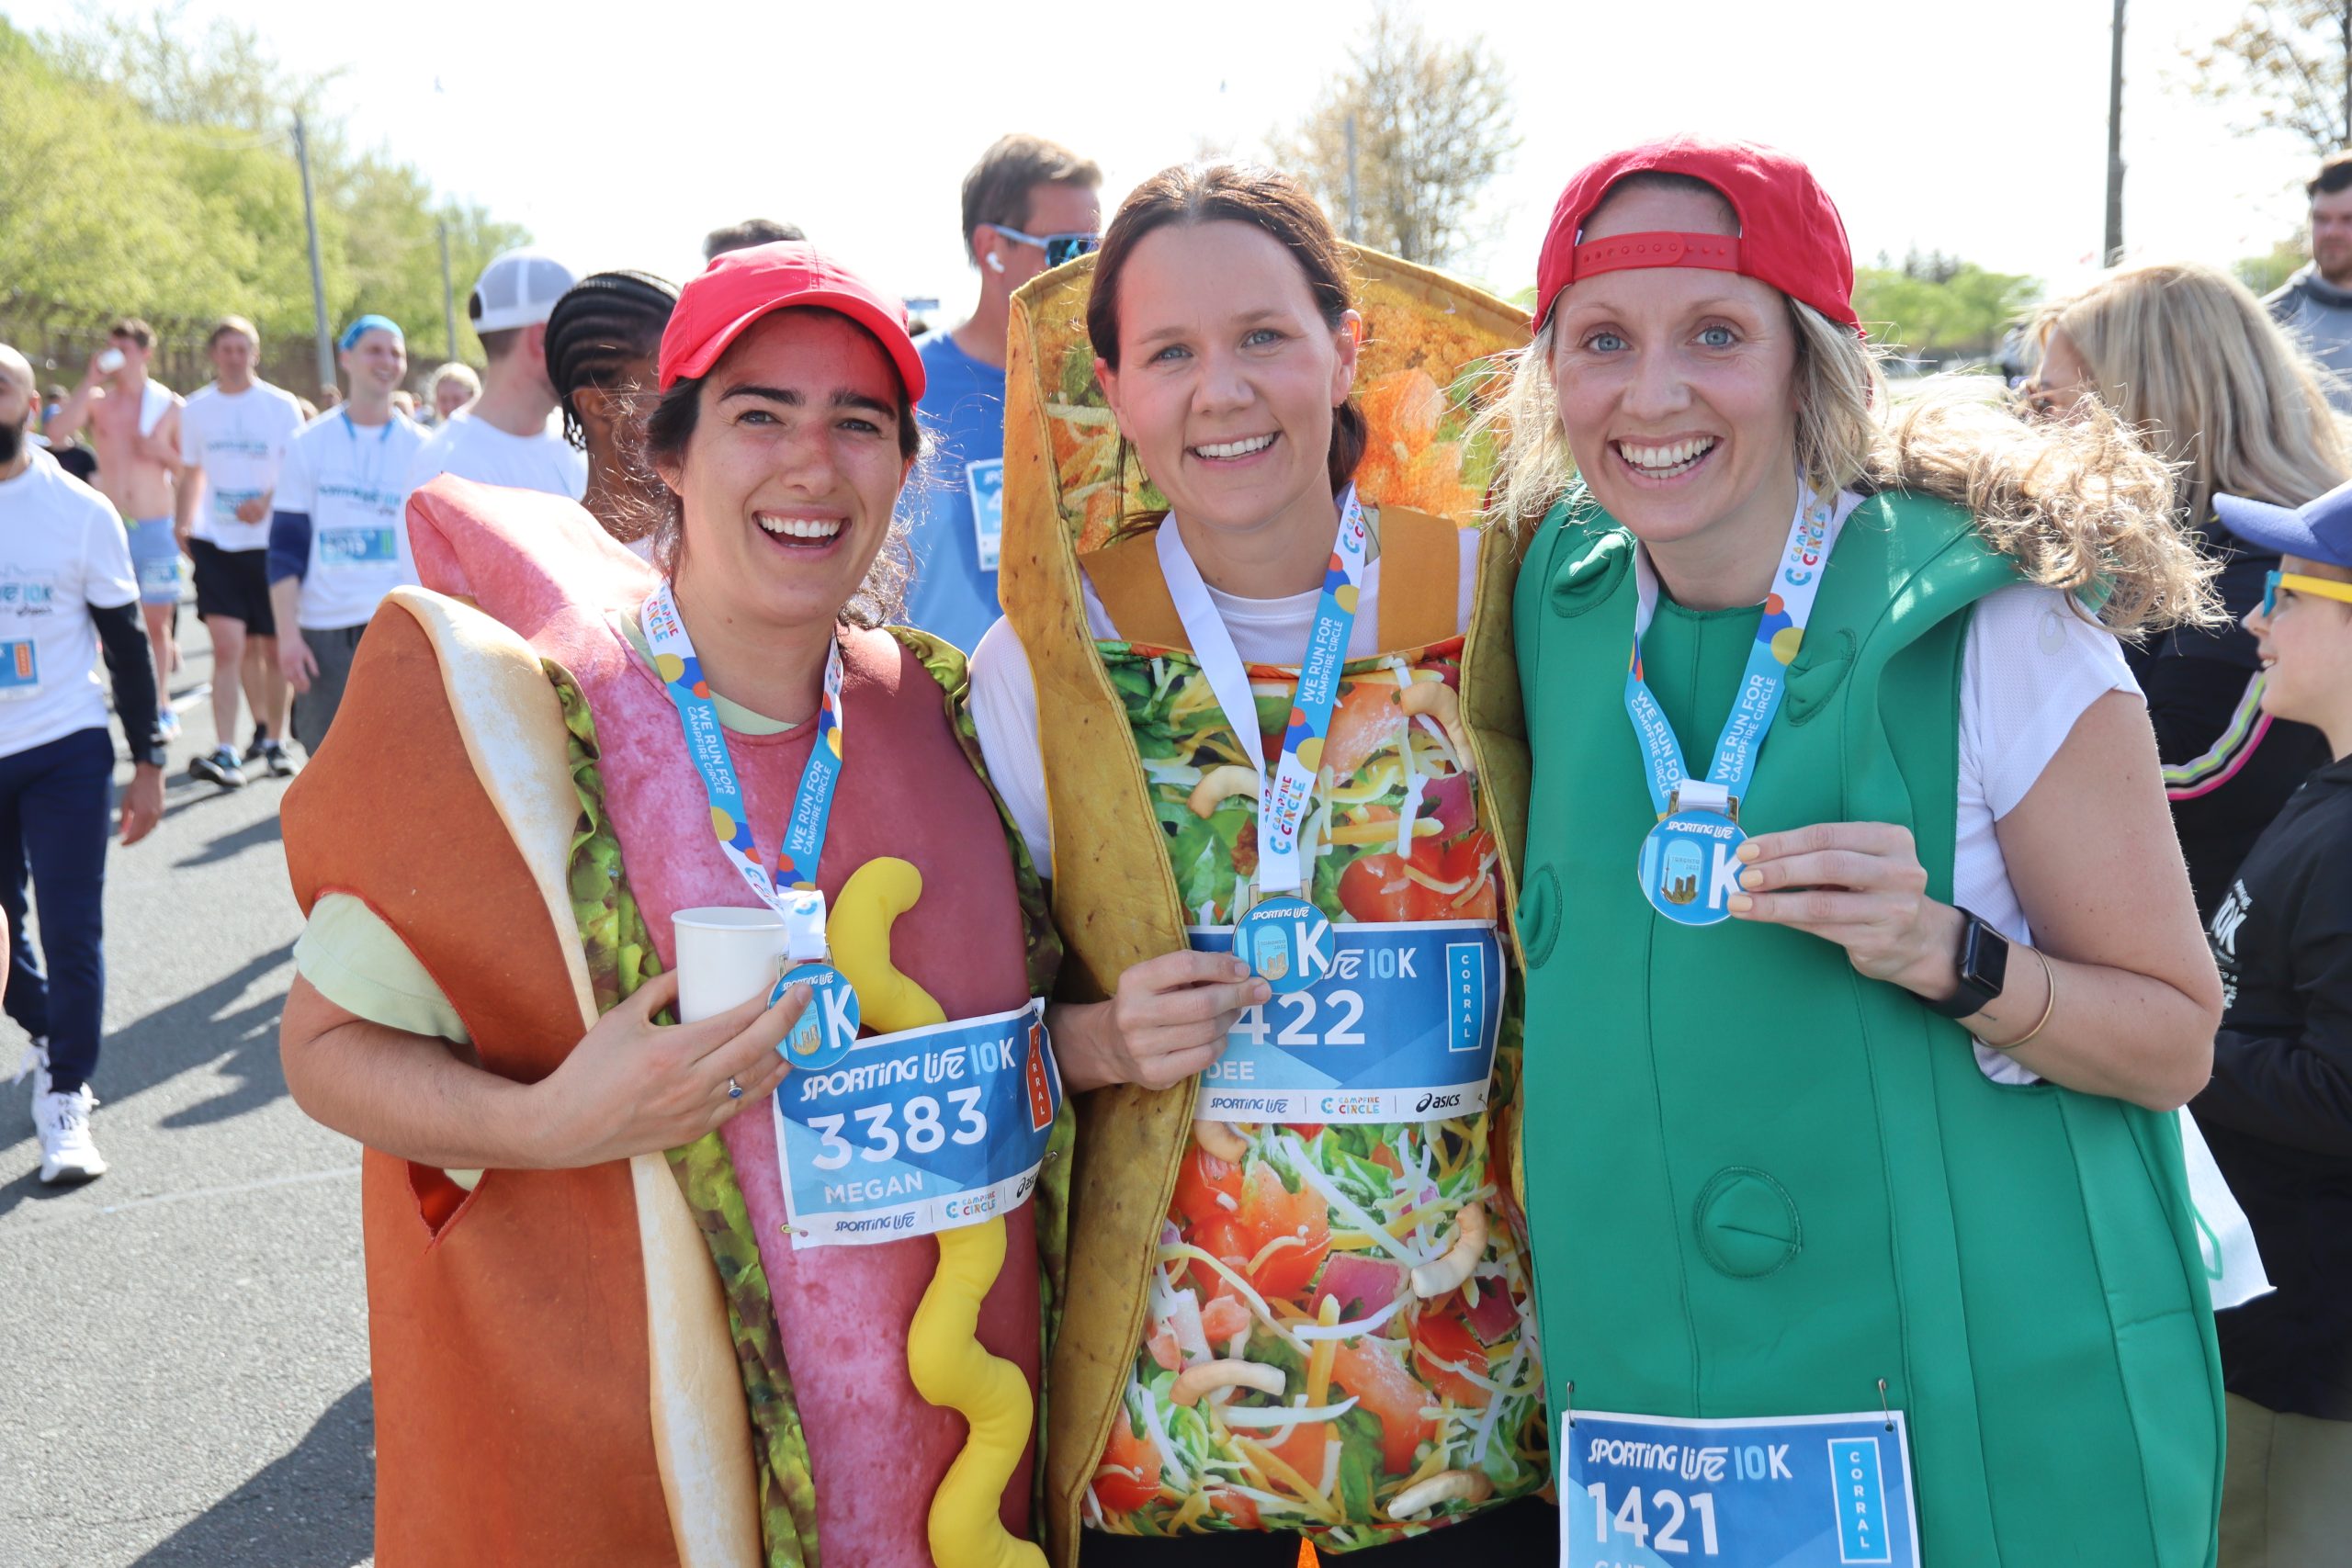 runners in costume showing off their medals